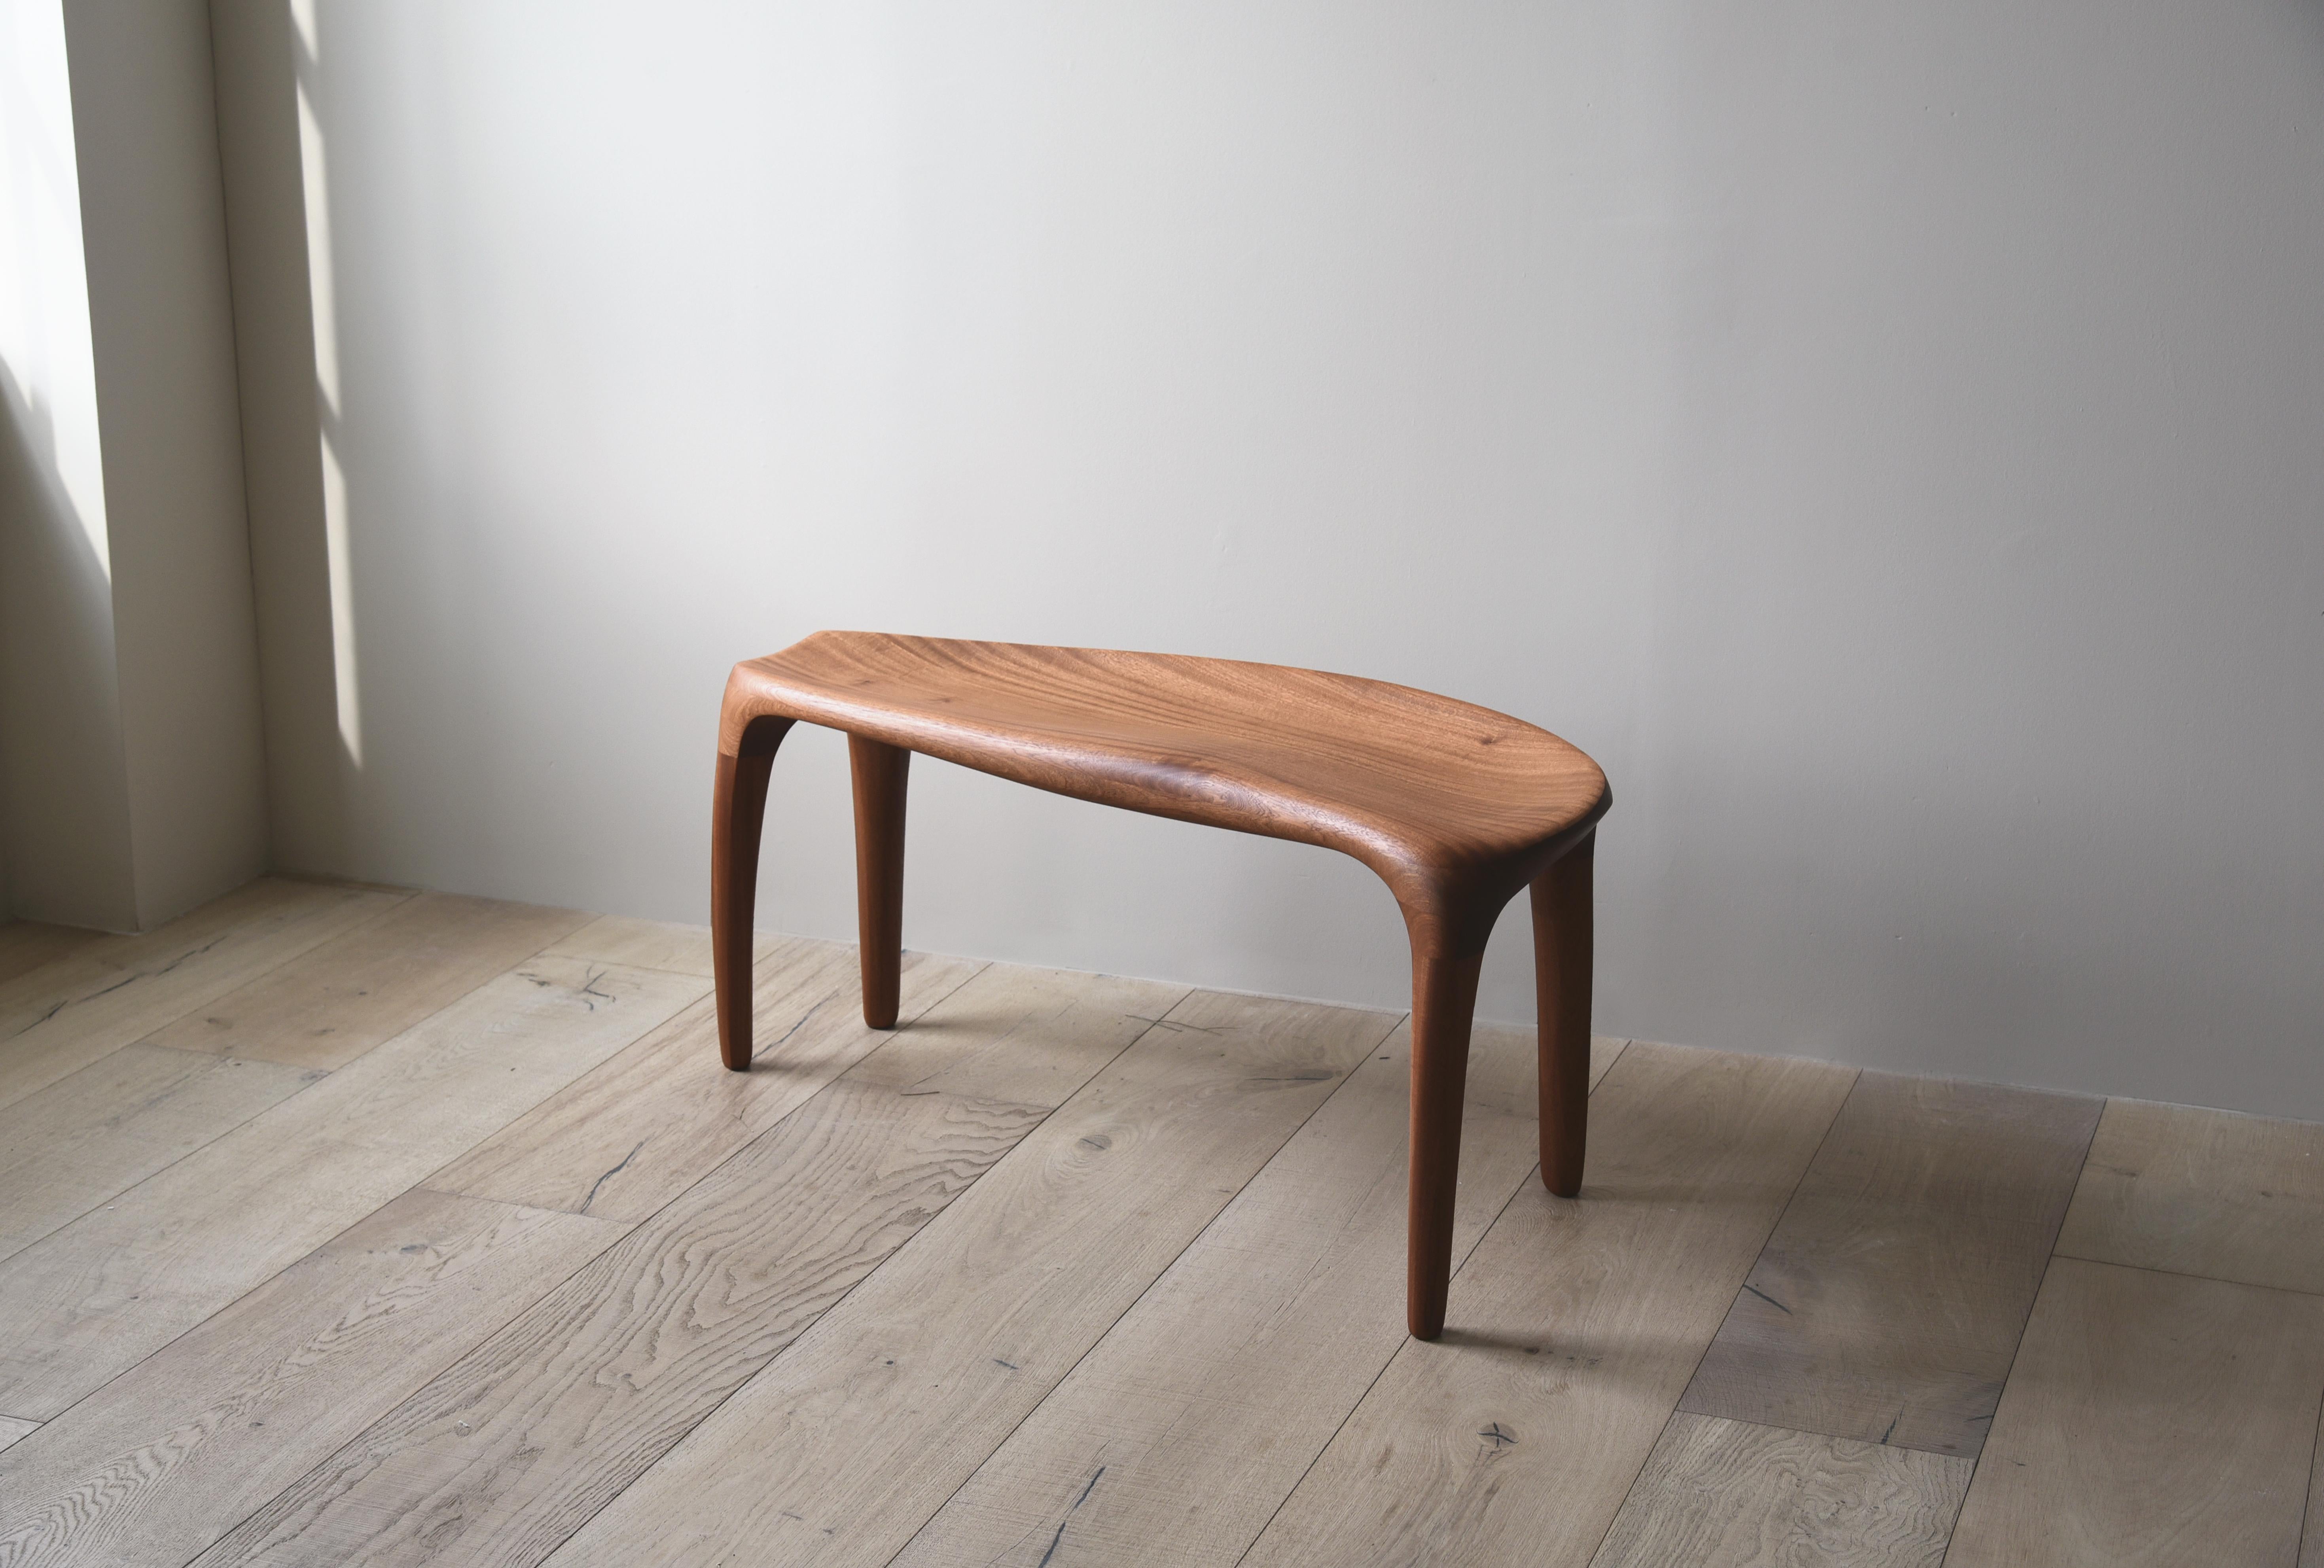 'Motion Bench' by Soo Joo is a sculptural wooden bench in Organic Modernism style. The artist creatively reimagines the essence of traditional Korean aesthetics into a modern minimal context. 

Motion bench is carved out of stack-laminated Sapele